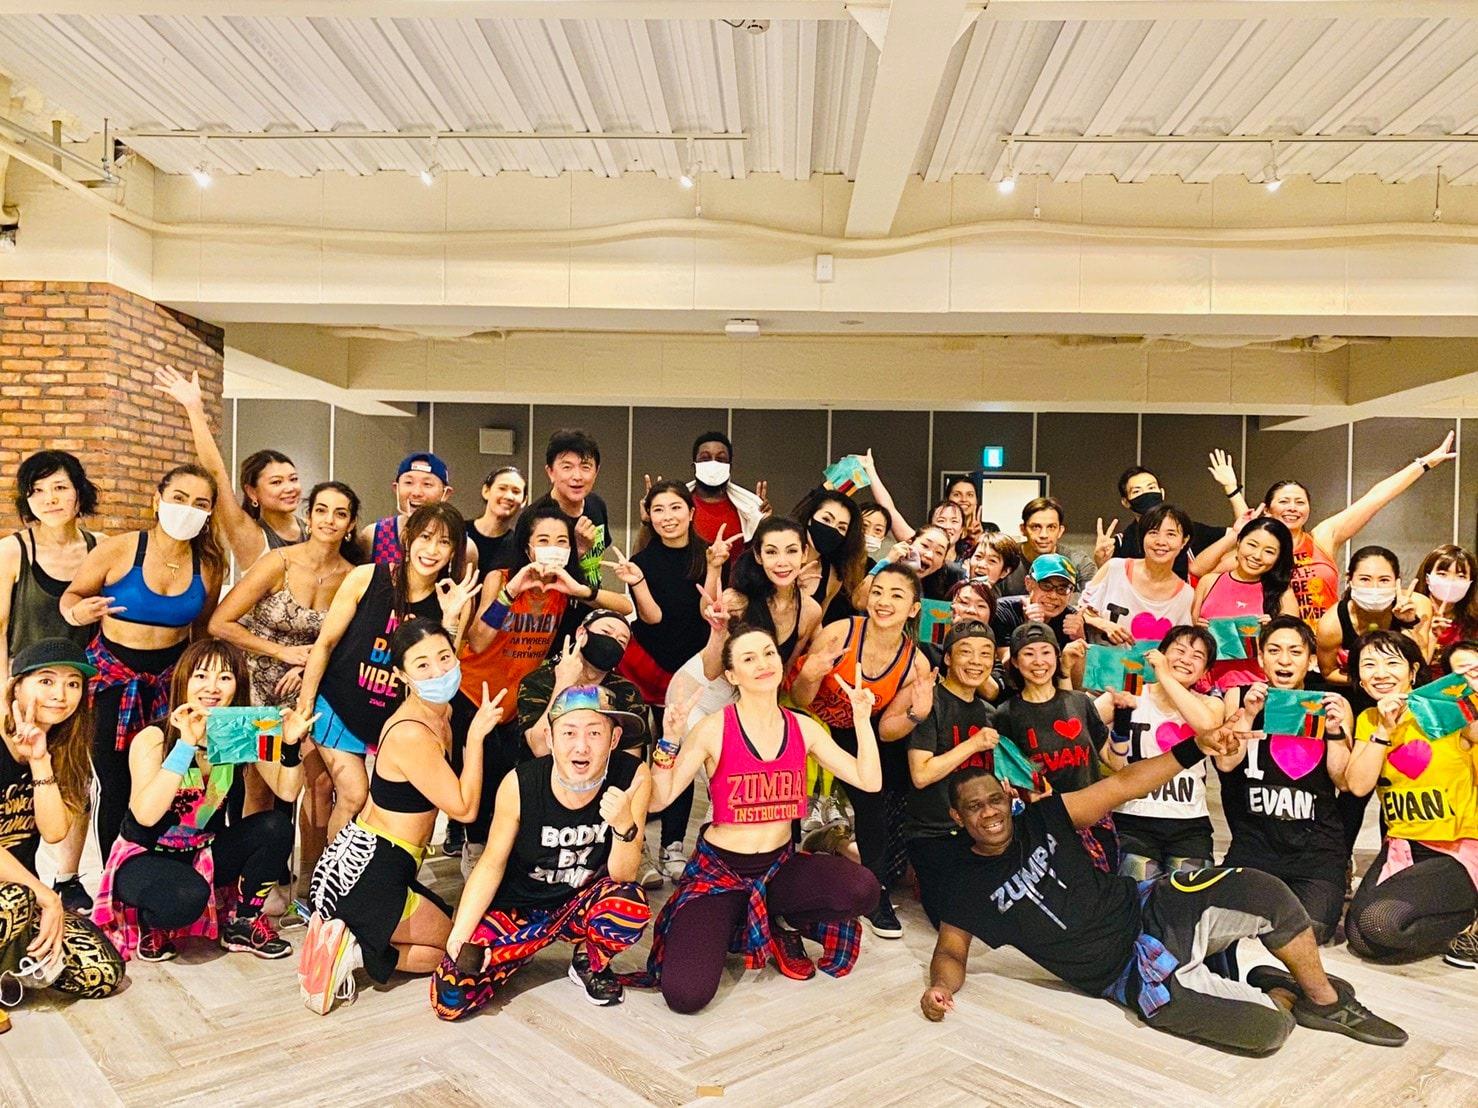 Copy of CANBERRA ZUMBA FITNESS CLASSES EVERY THURSDAY AND SATURDAY